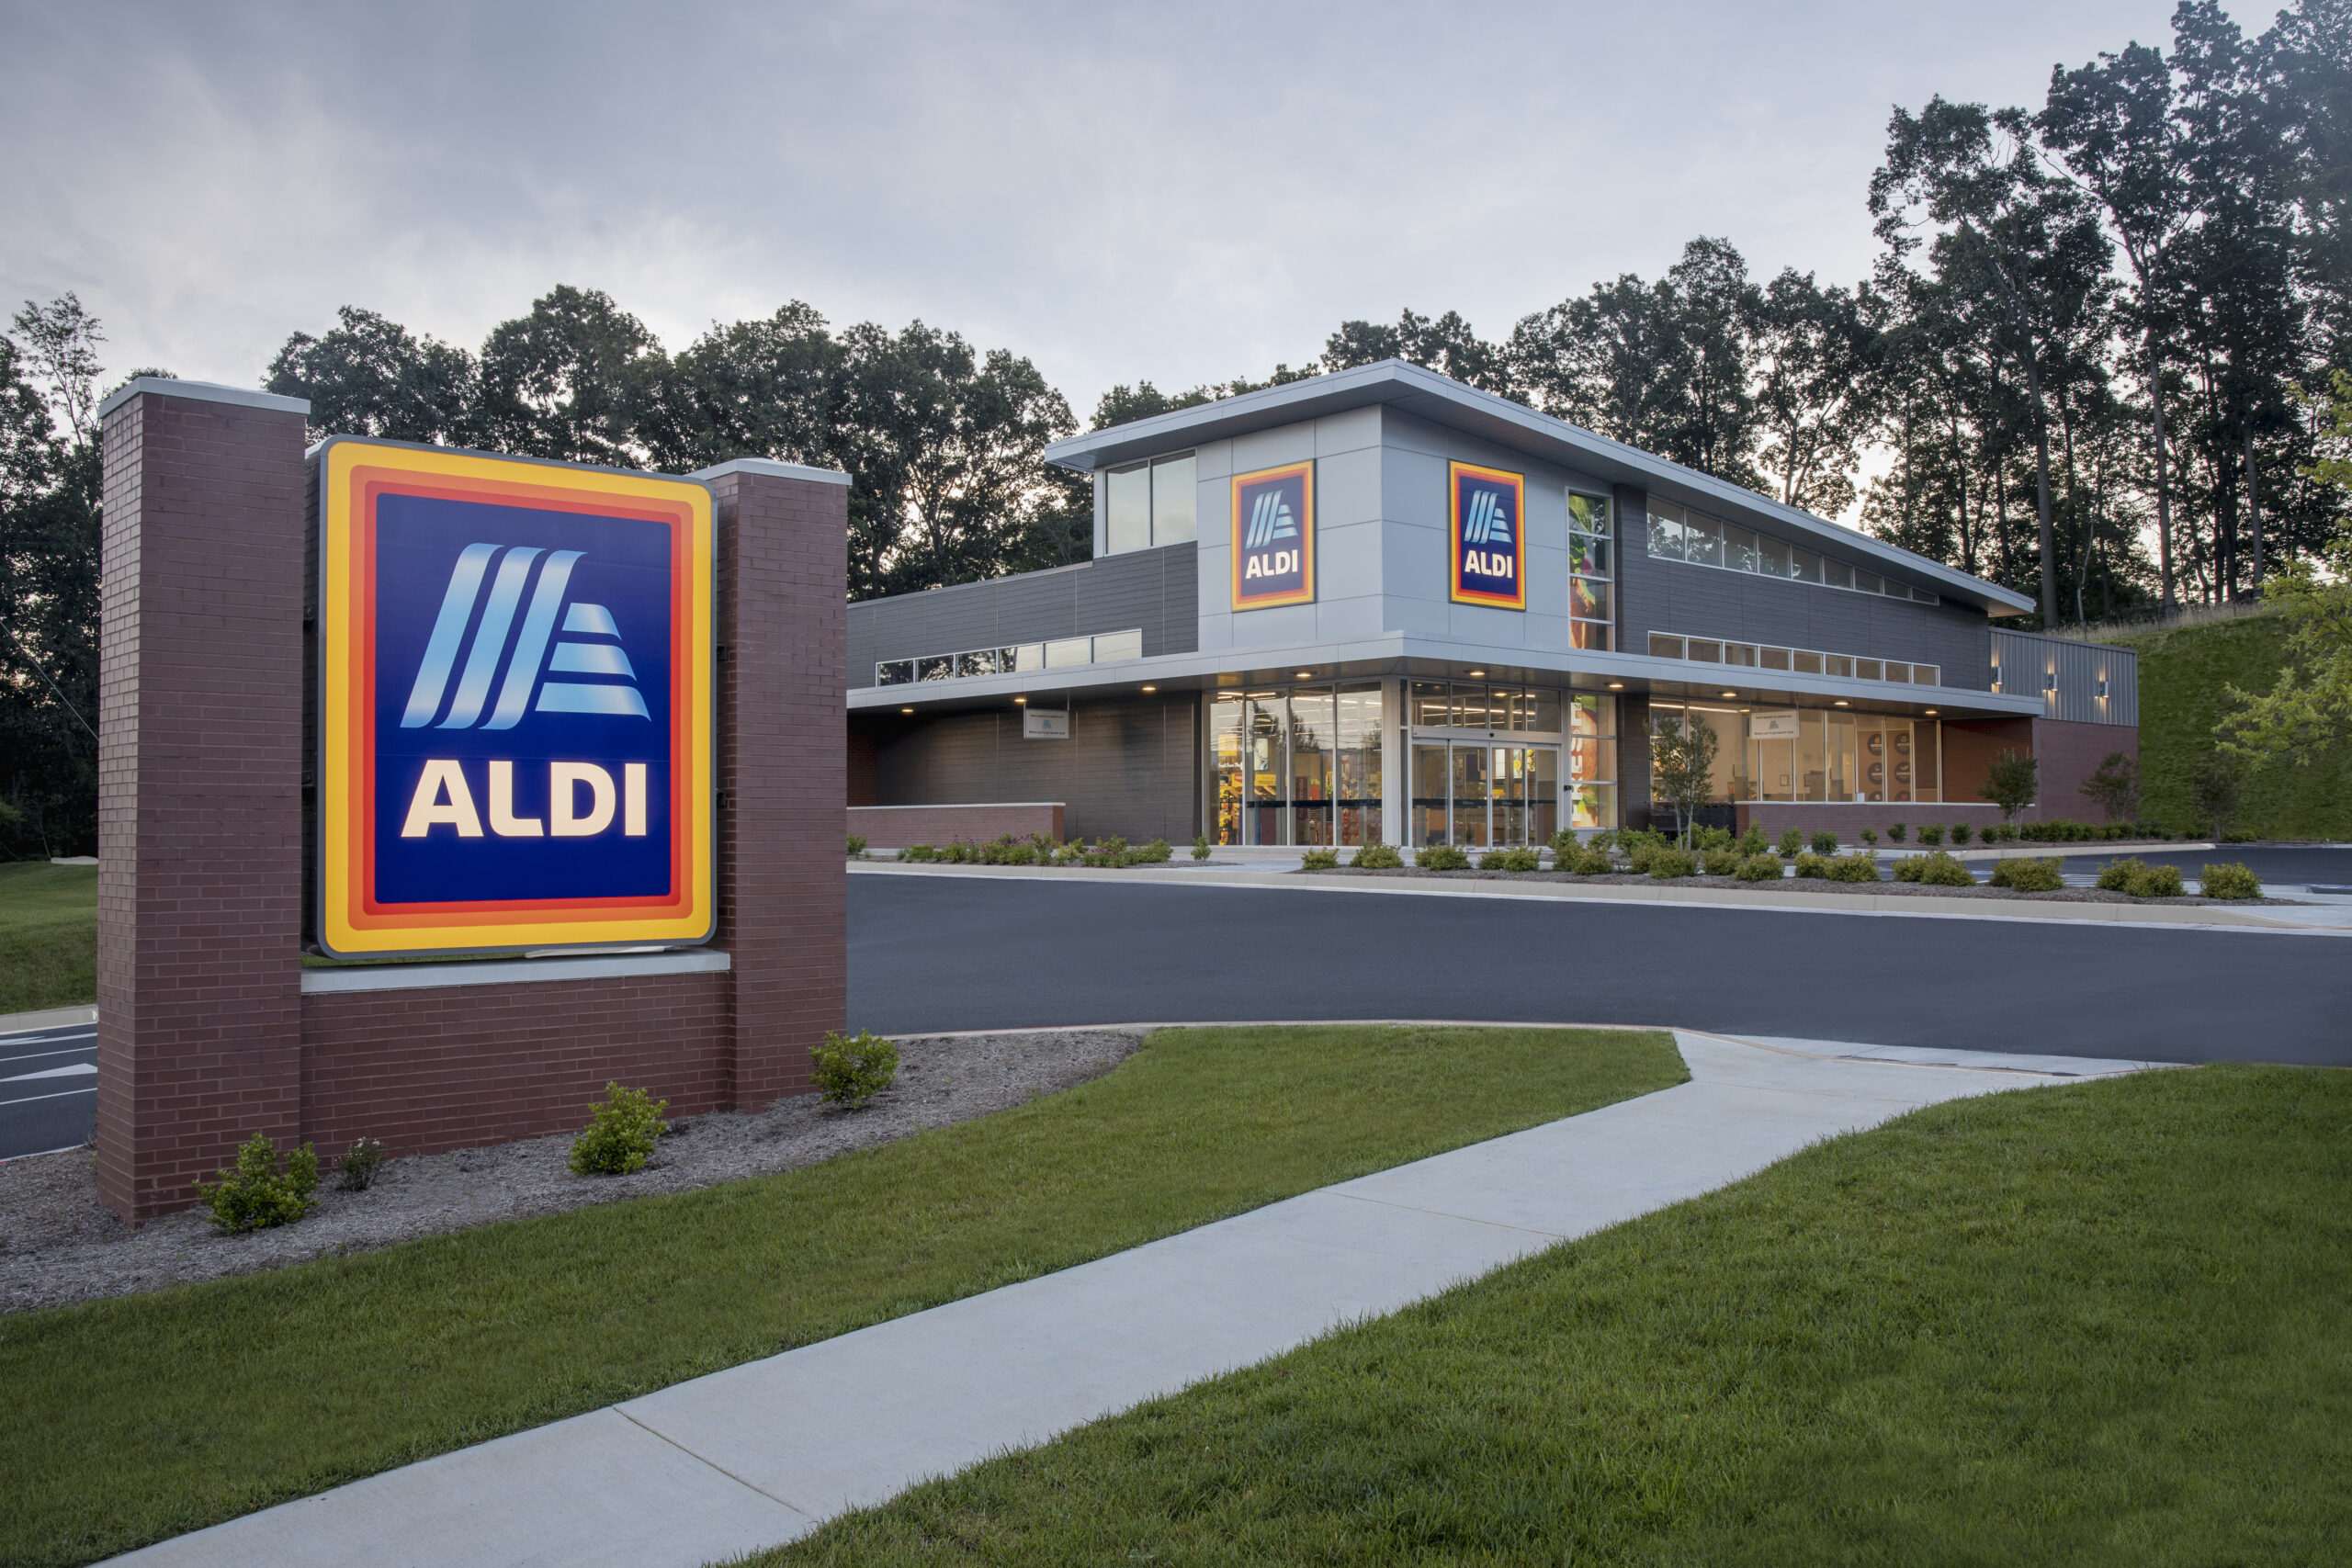 When Is The New Aldi Opening in Tifton?